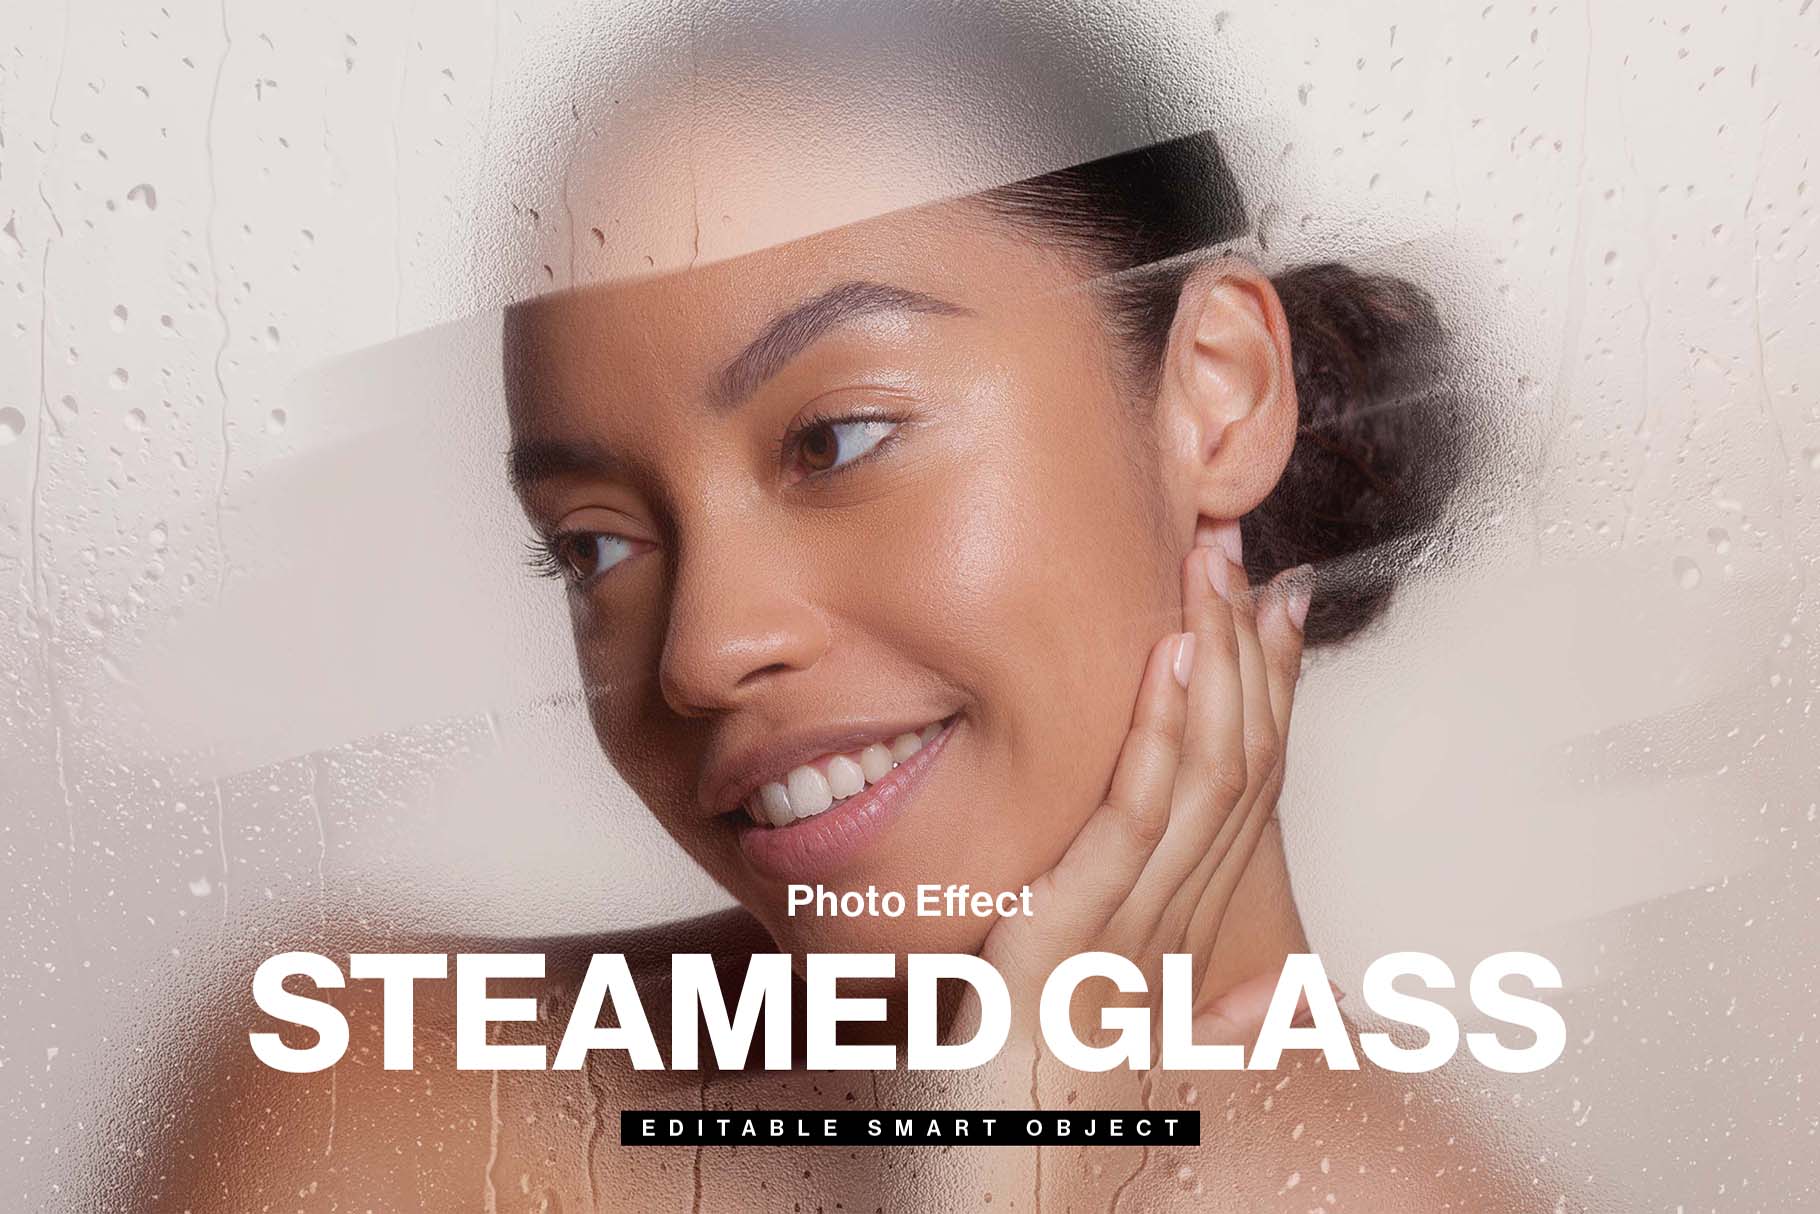 Steamed Glass Photo Effect Template in PSD